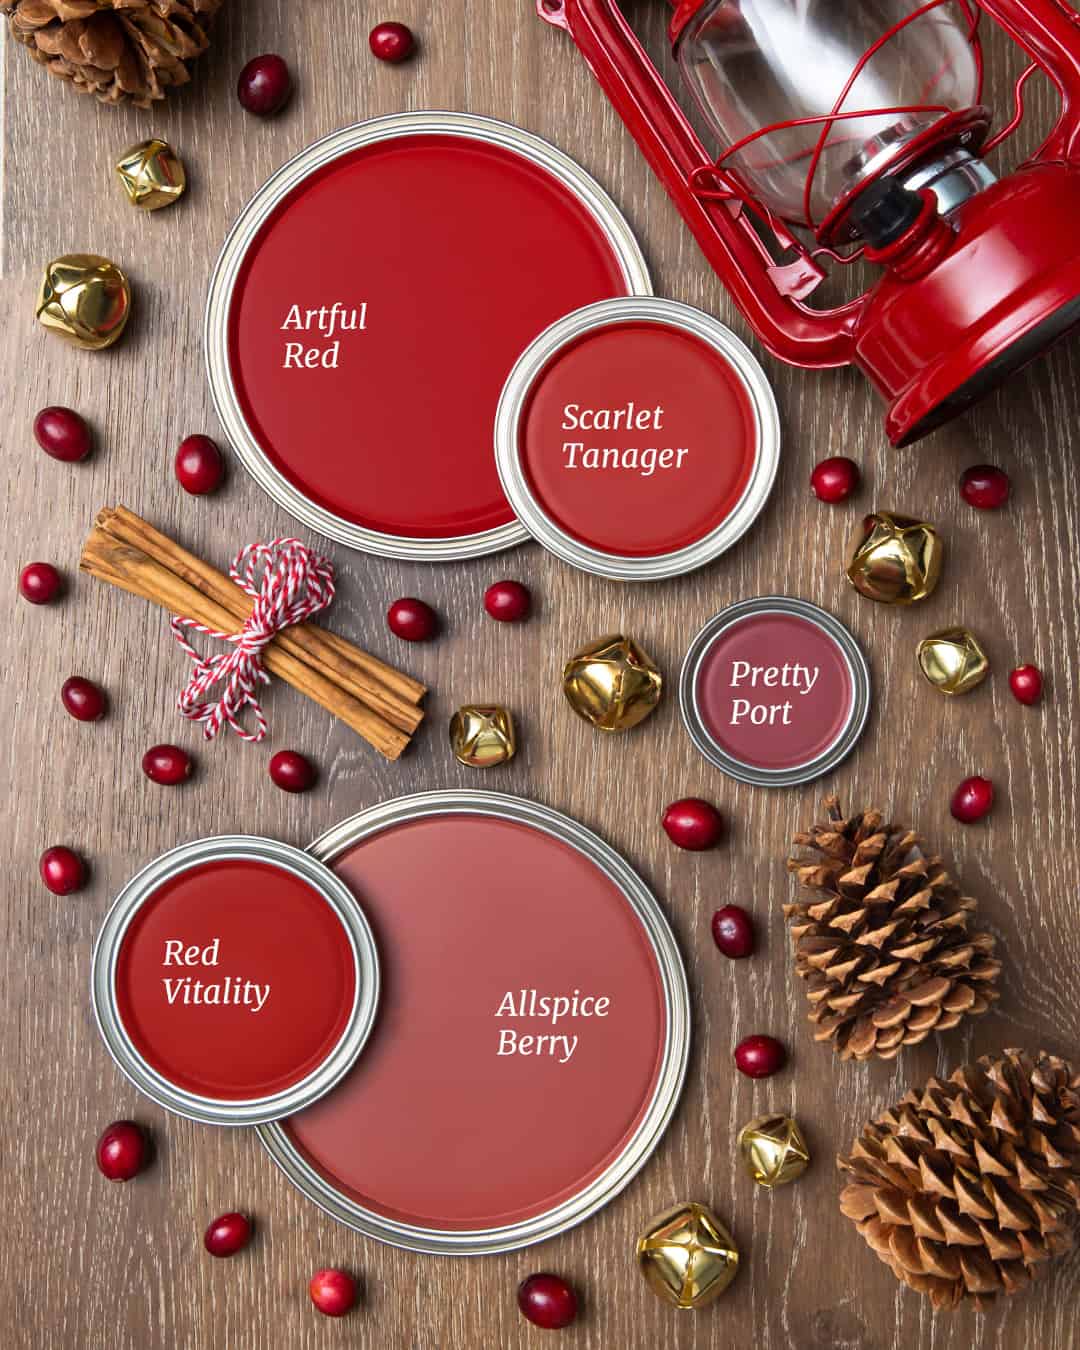 Cool red holiday paint colors